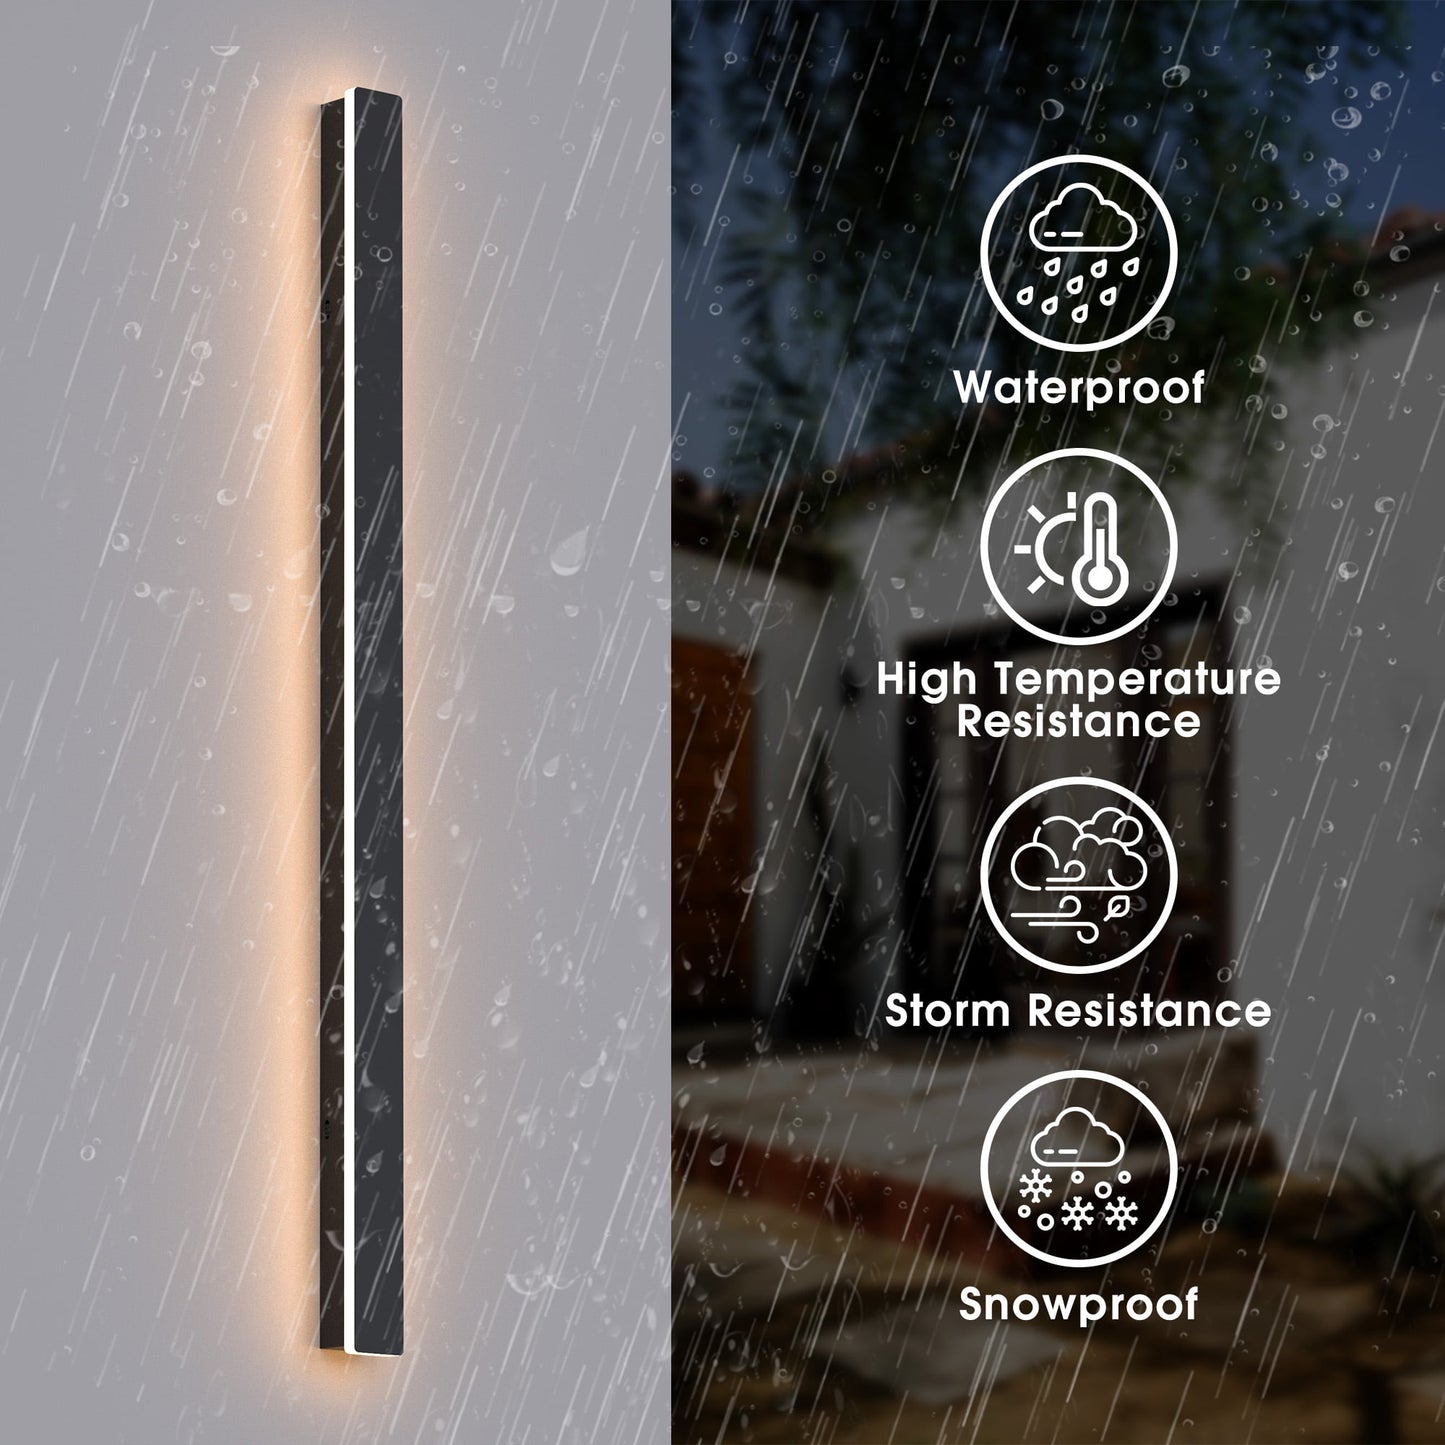 1-Light 20W Outdoor Minimalist Linear Wall Lamp 3000K Warm Light led Lighting Waterproof IP67 (39 inches) for Porch